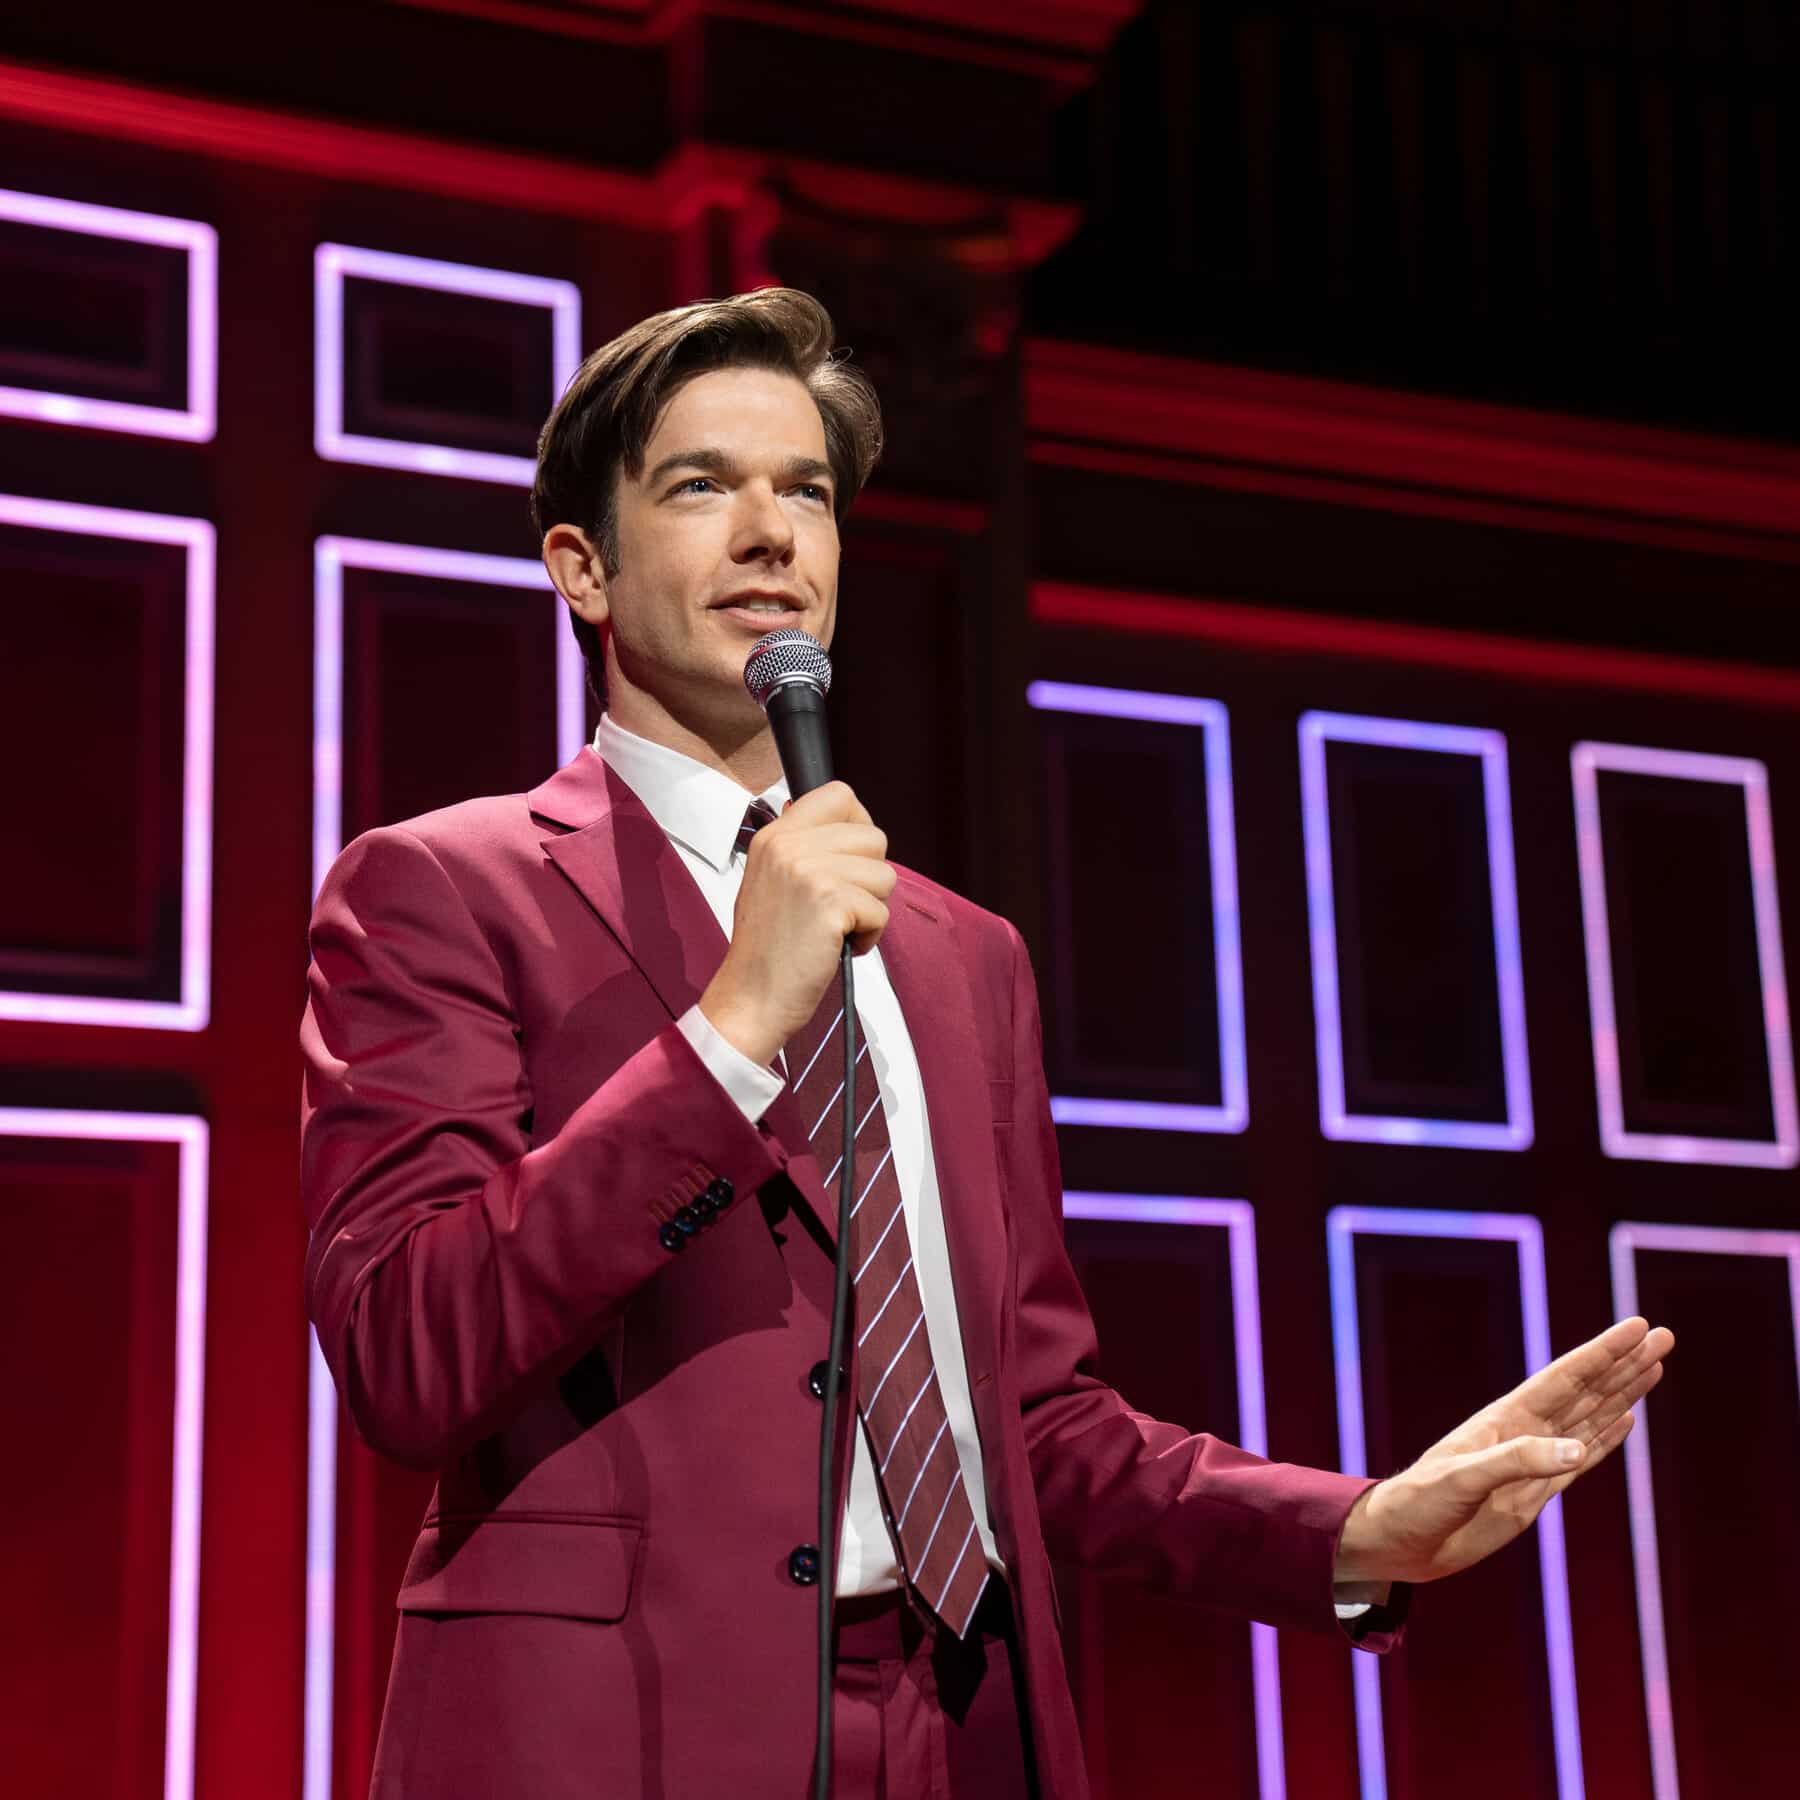 John Mulaney doing stand-up comedy